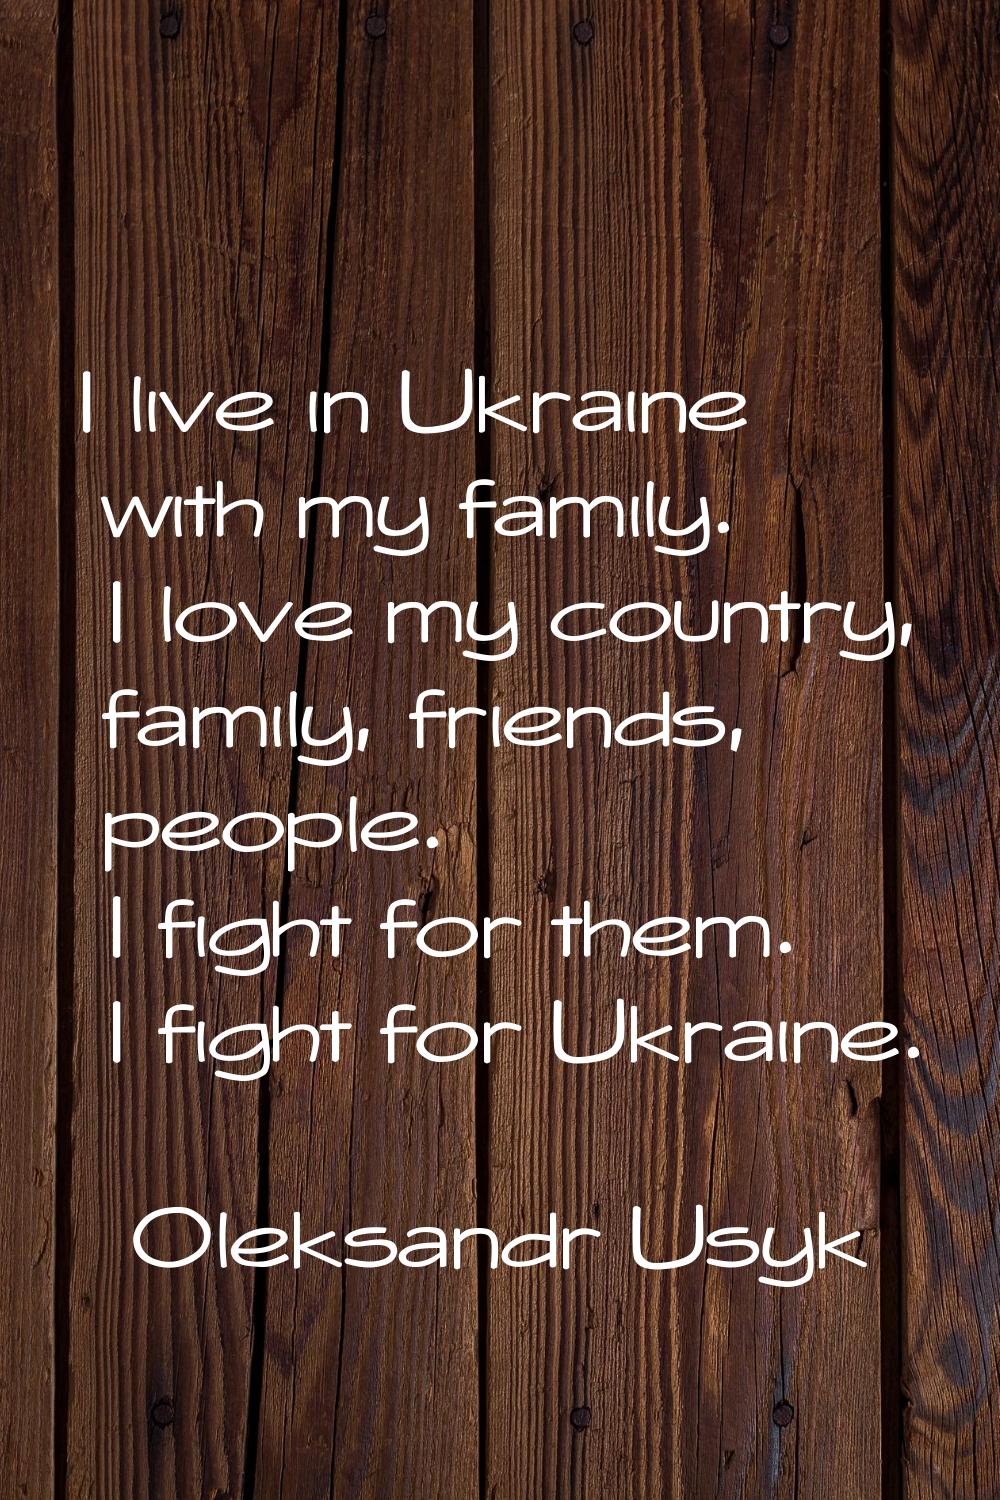 I live in Ukraine with my family. I love my country, family, friends, people. I fight for them. I f